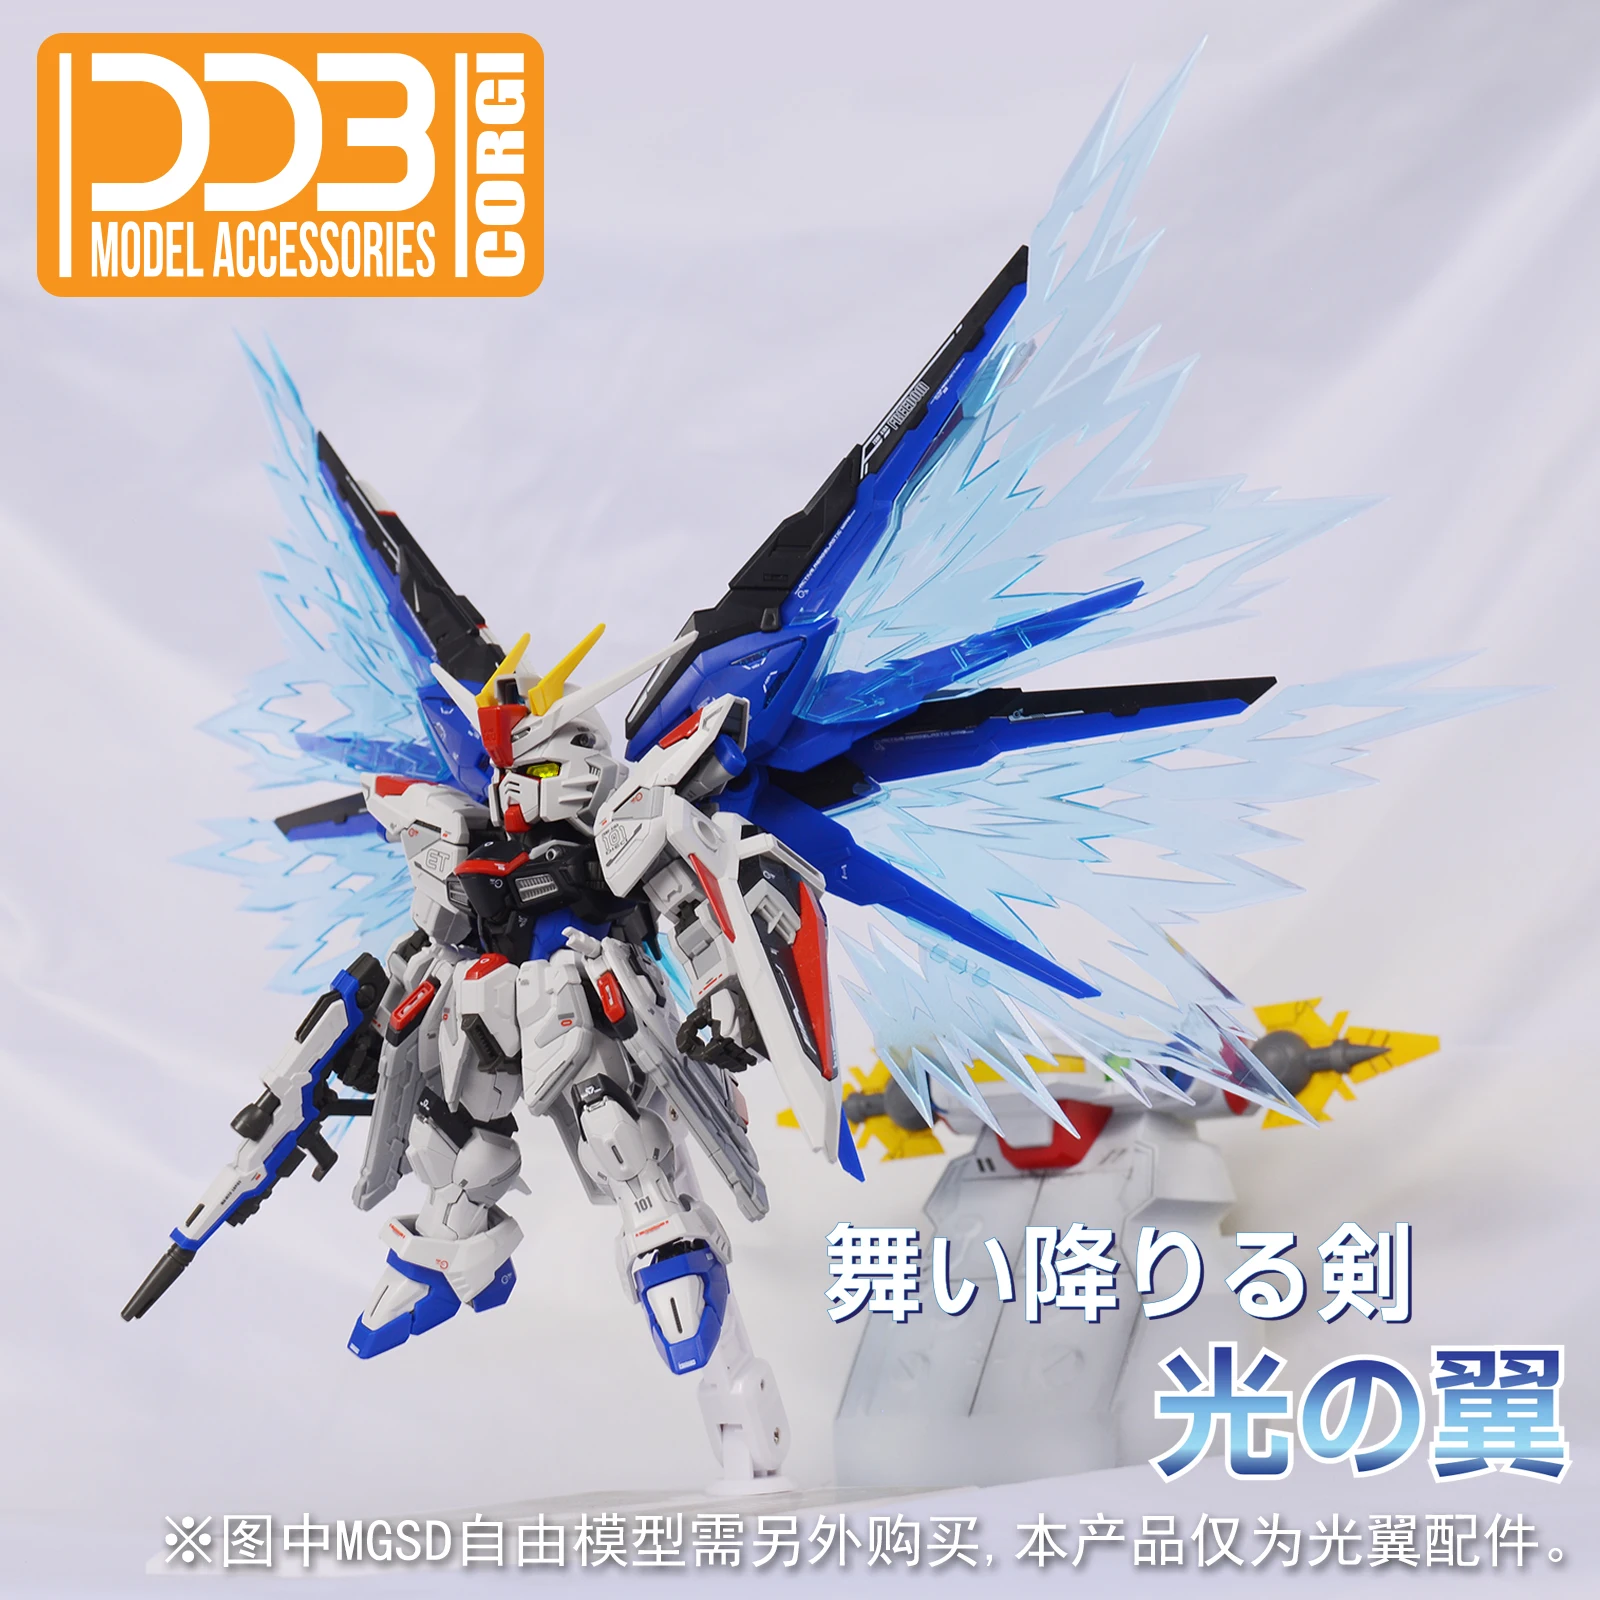 

DDB FOR MGSD Freedom GUNDAM WING OF LIGHT OPTION SET EFFECT PARTS ASSEMBLE MODEL ENHANCE DECORATED SET